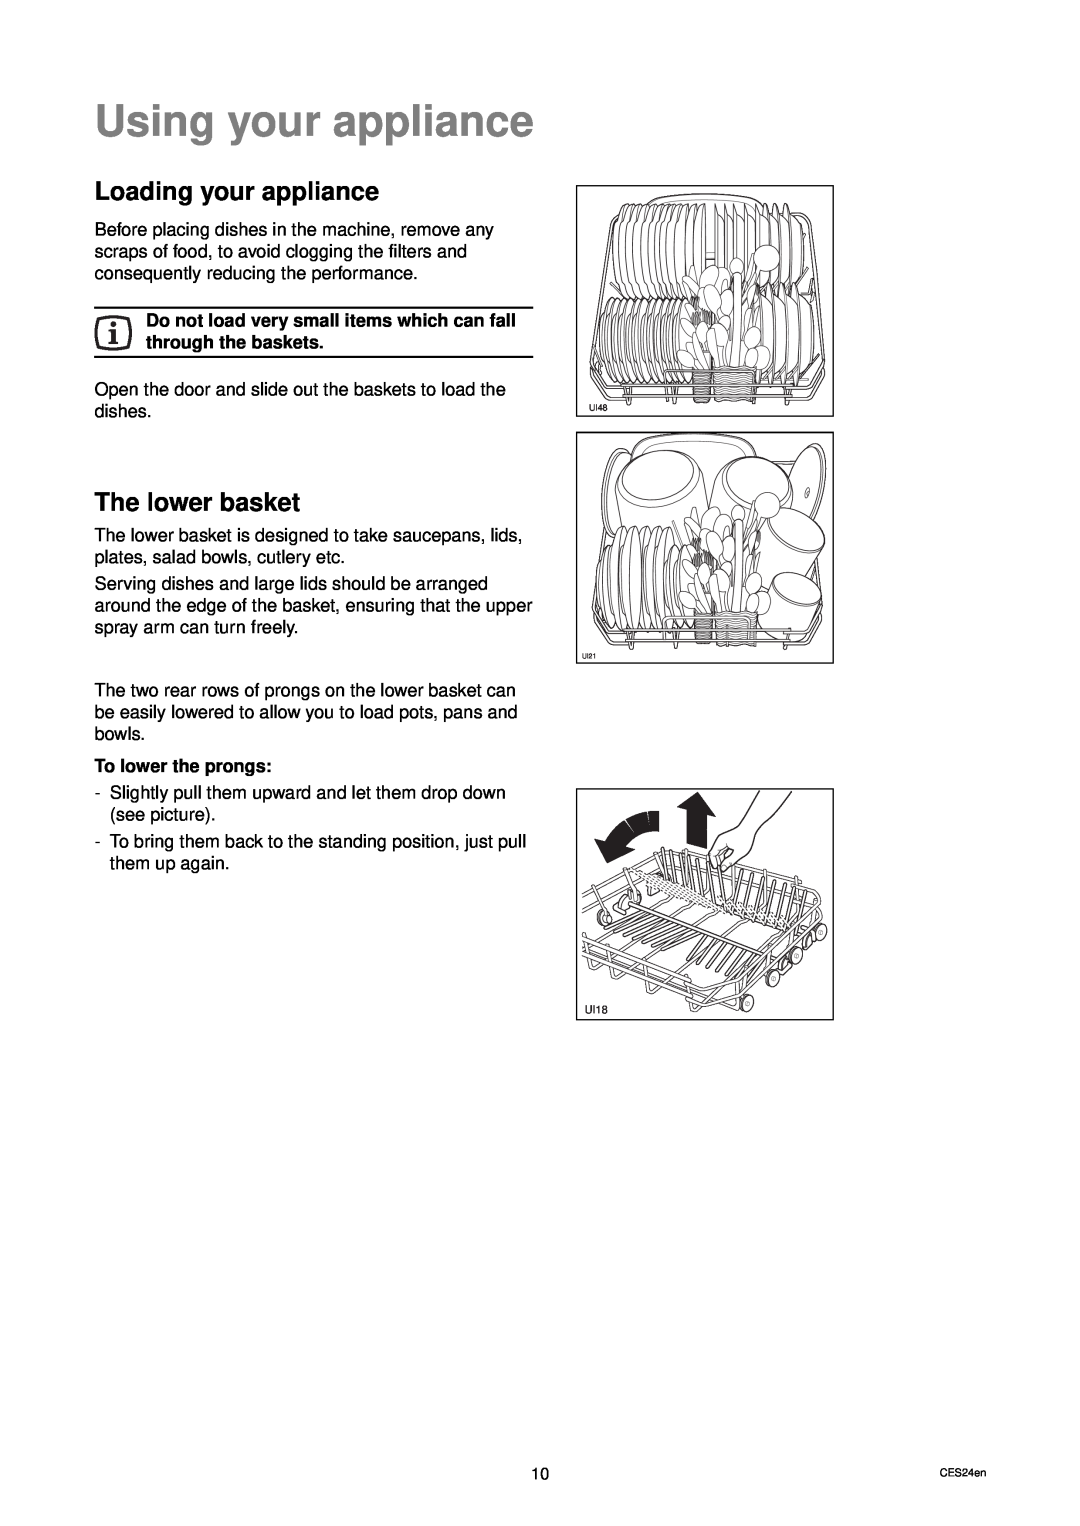 Zanussi DES 959 manual Using your appliance, Loading your appliance, The lower basket, To lower the prongs 